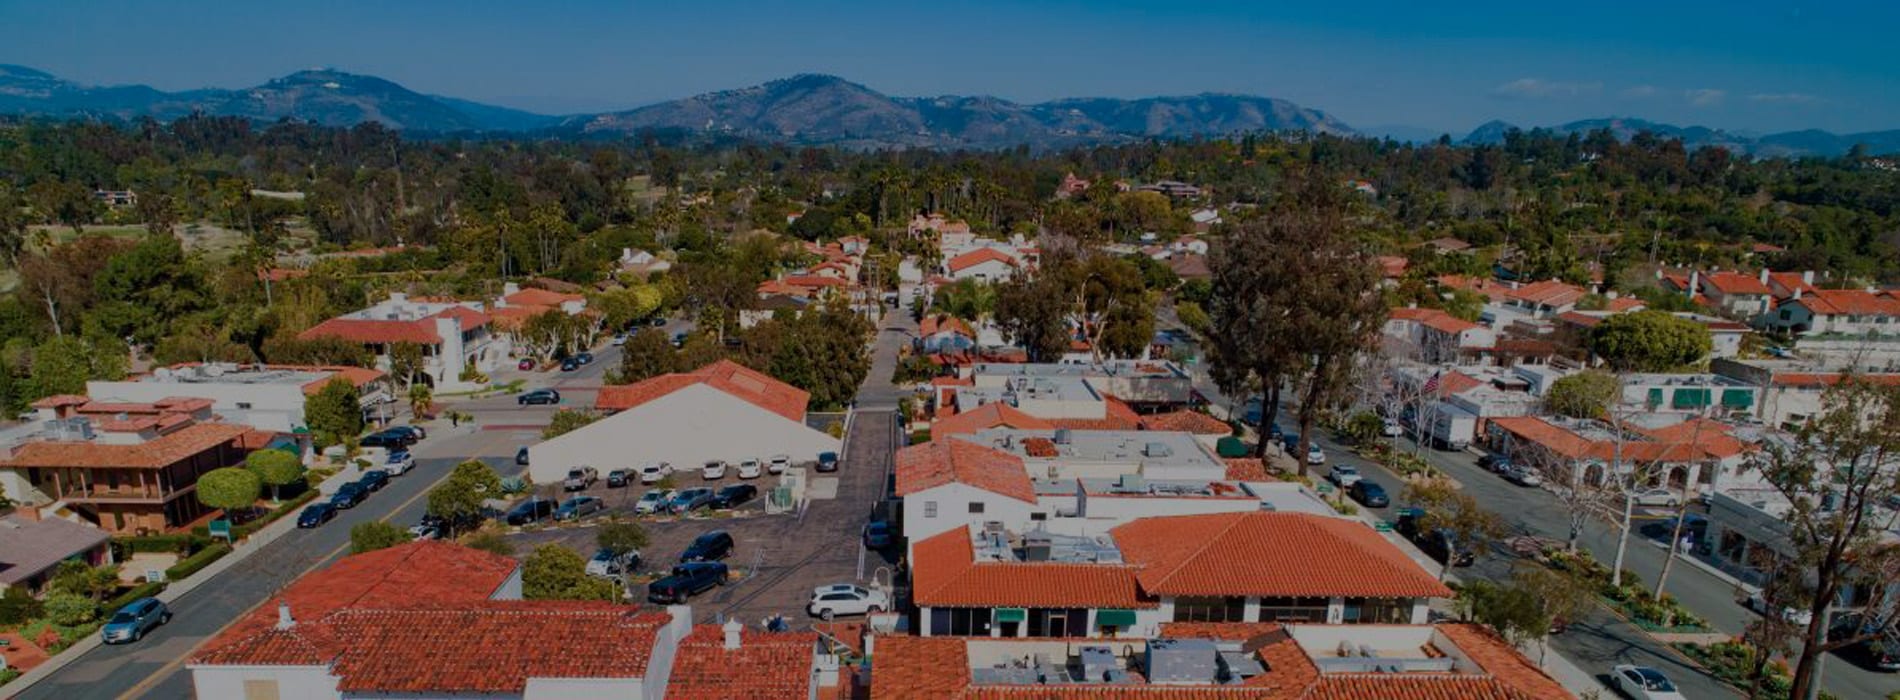 Aerial view of Rancho Santa Fe town in California with parked cars lining the streets.